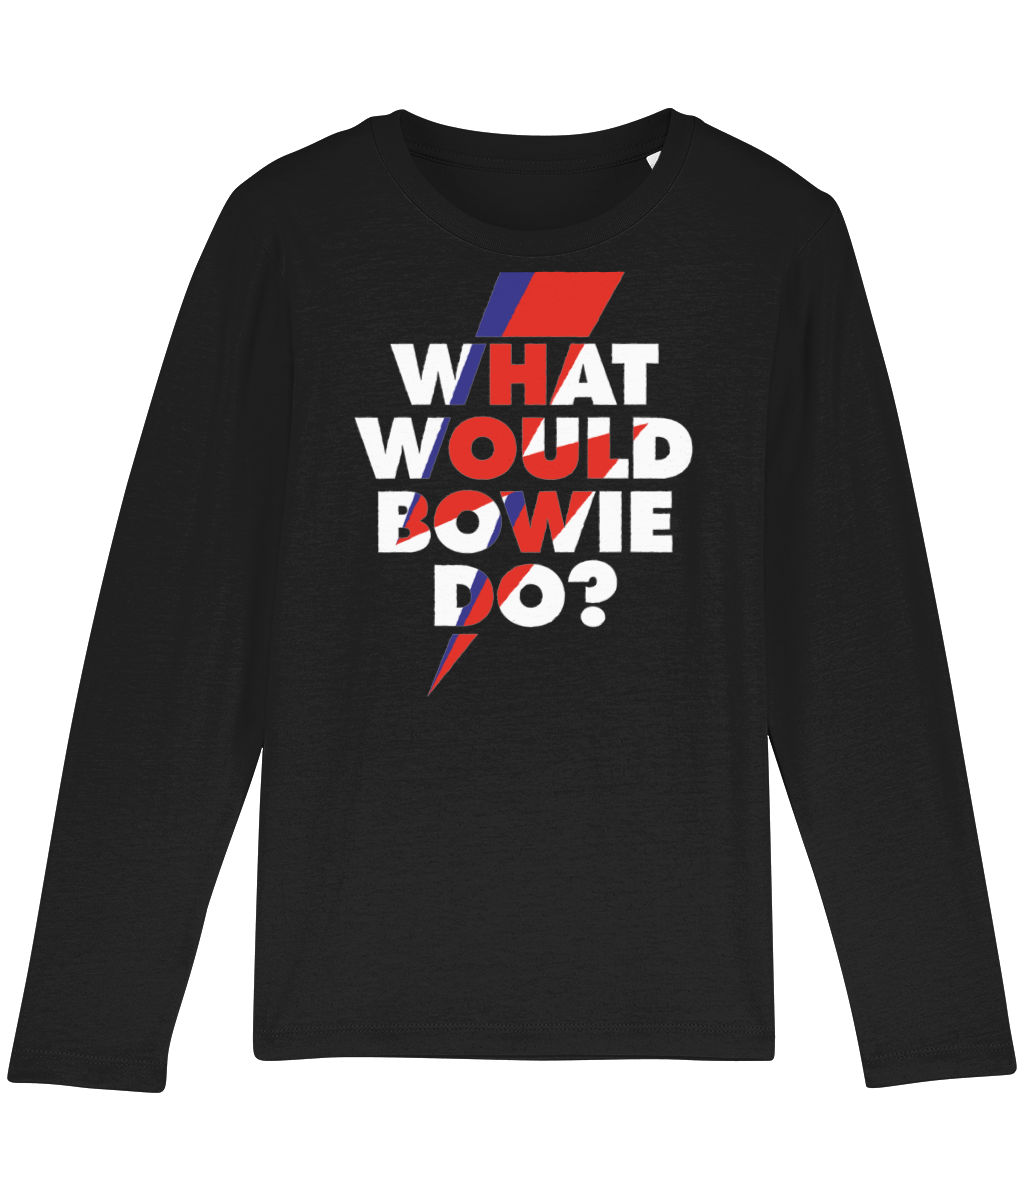 Long Sleeve T Shirt, 100% Organic Soft Cotton, What Would Bowie do?